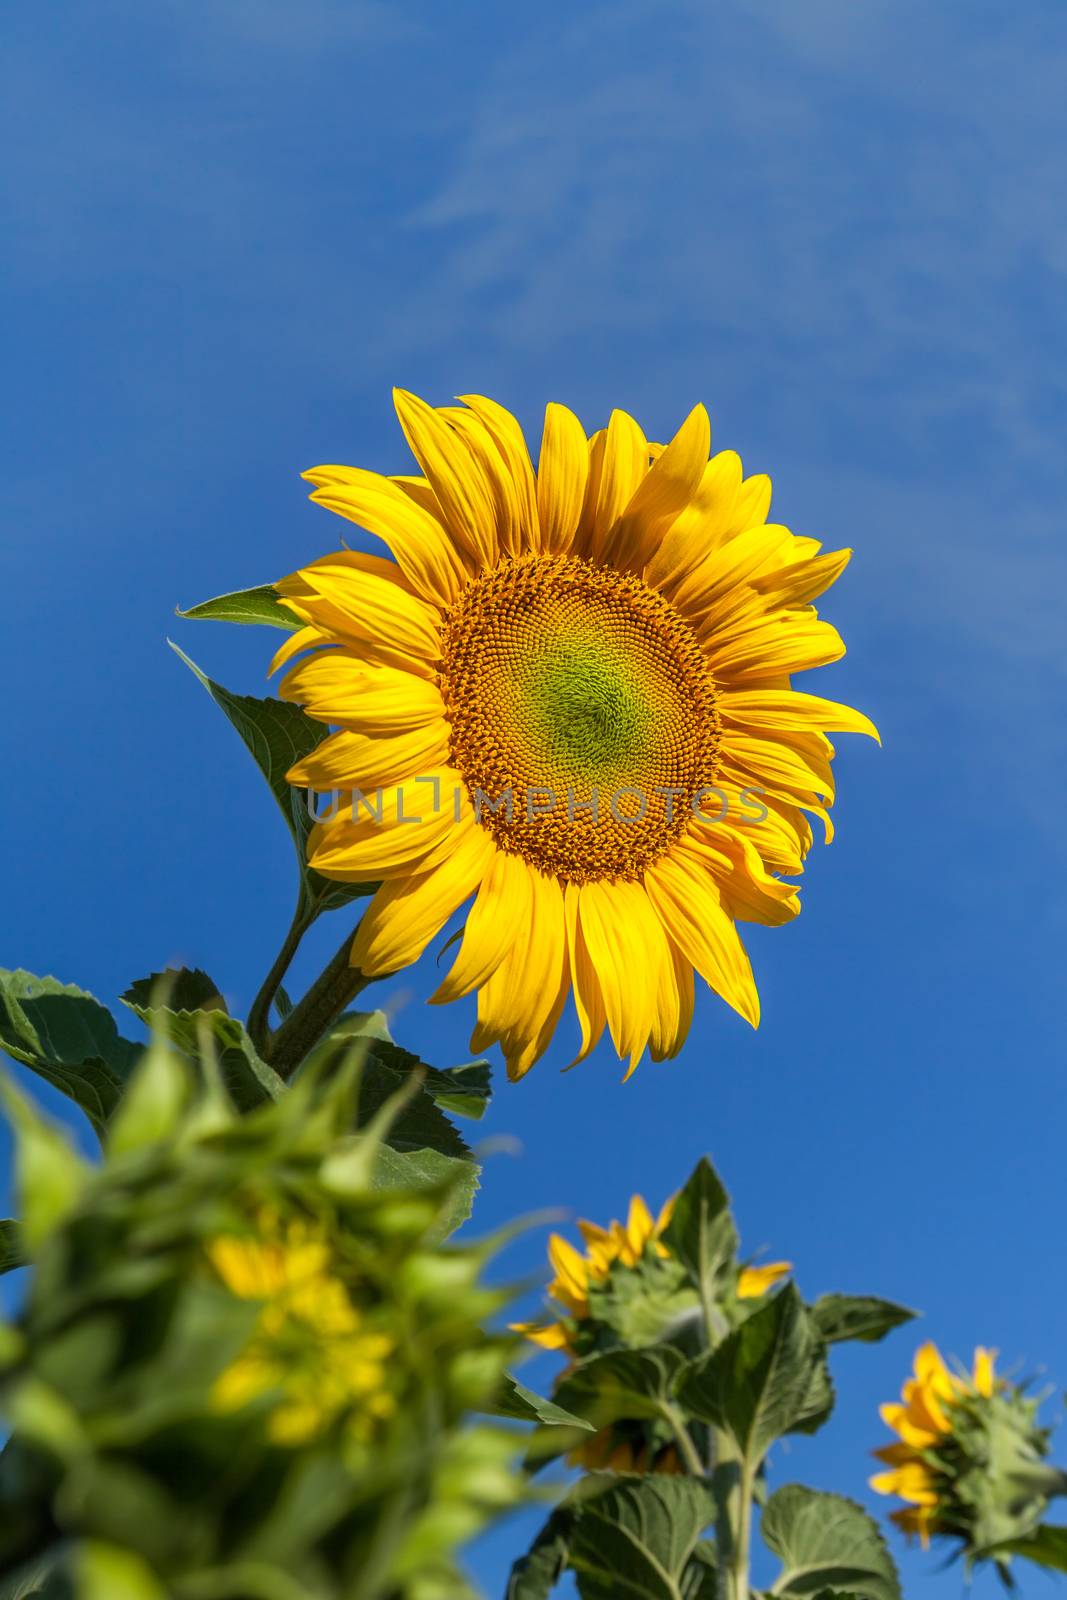 Flower sunflower on a background of blue sky, close-up.